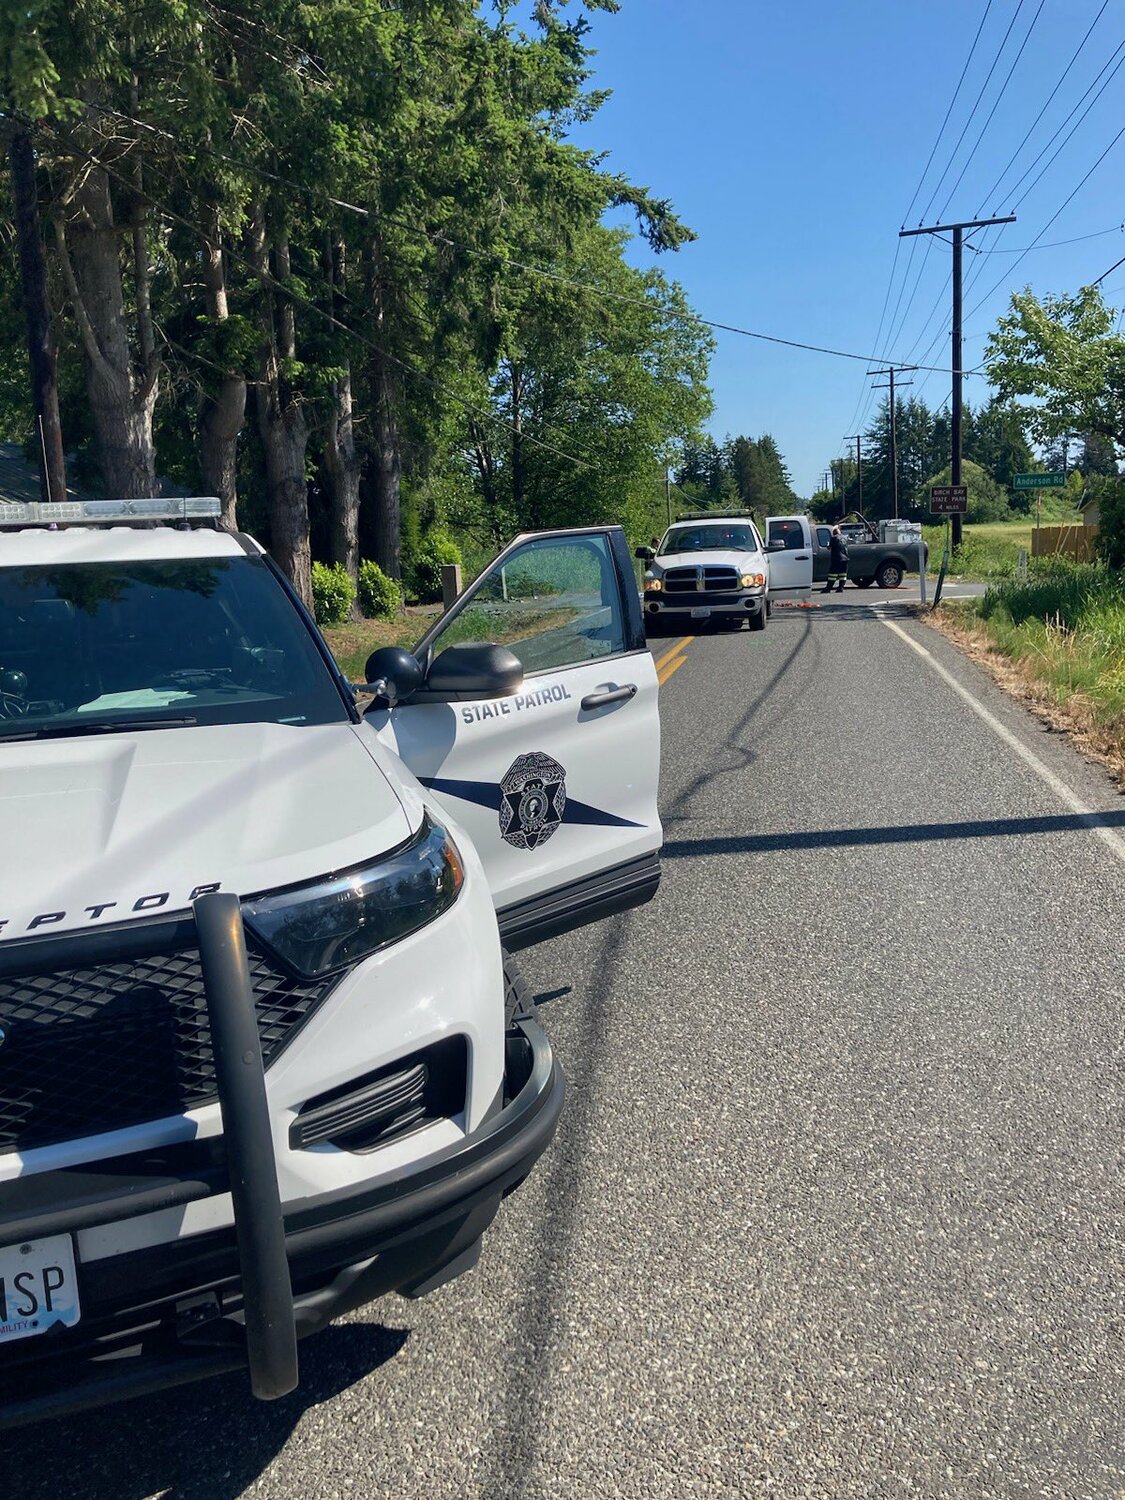 Washington State Patrol troopers block the intersection of Blaine and Anderson roads while responding to a vehicle accident on June 6.